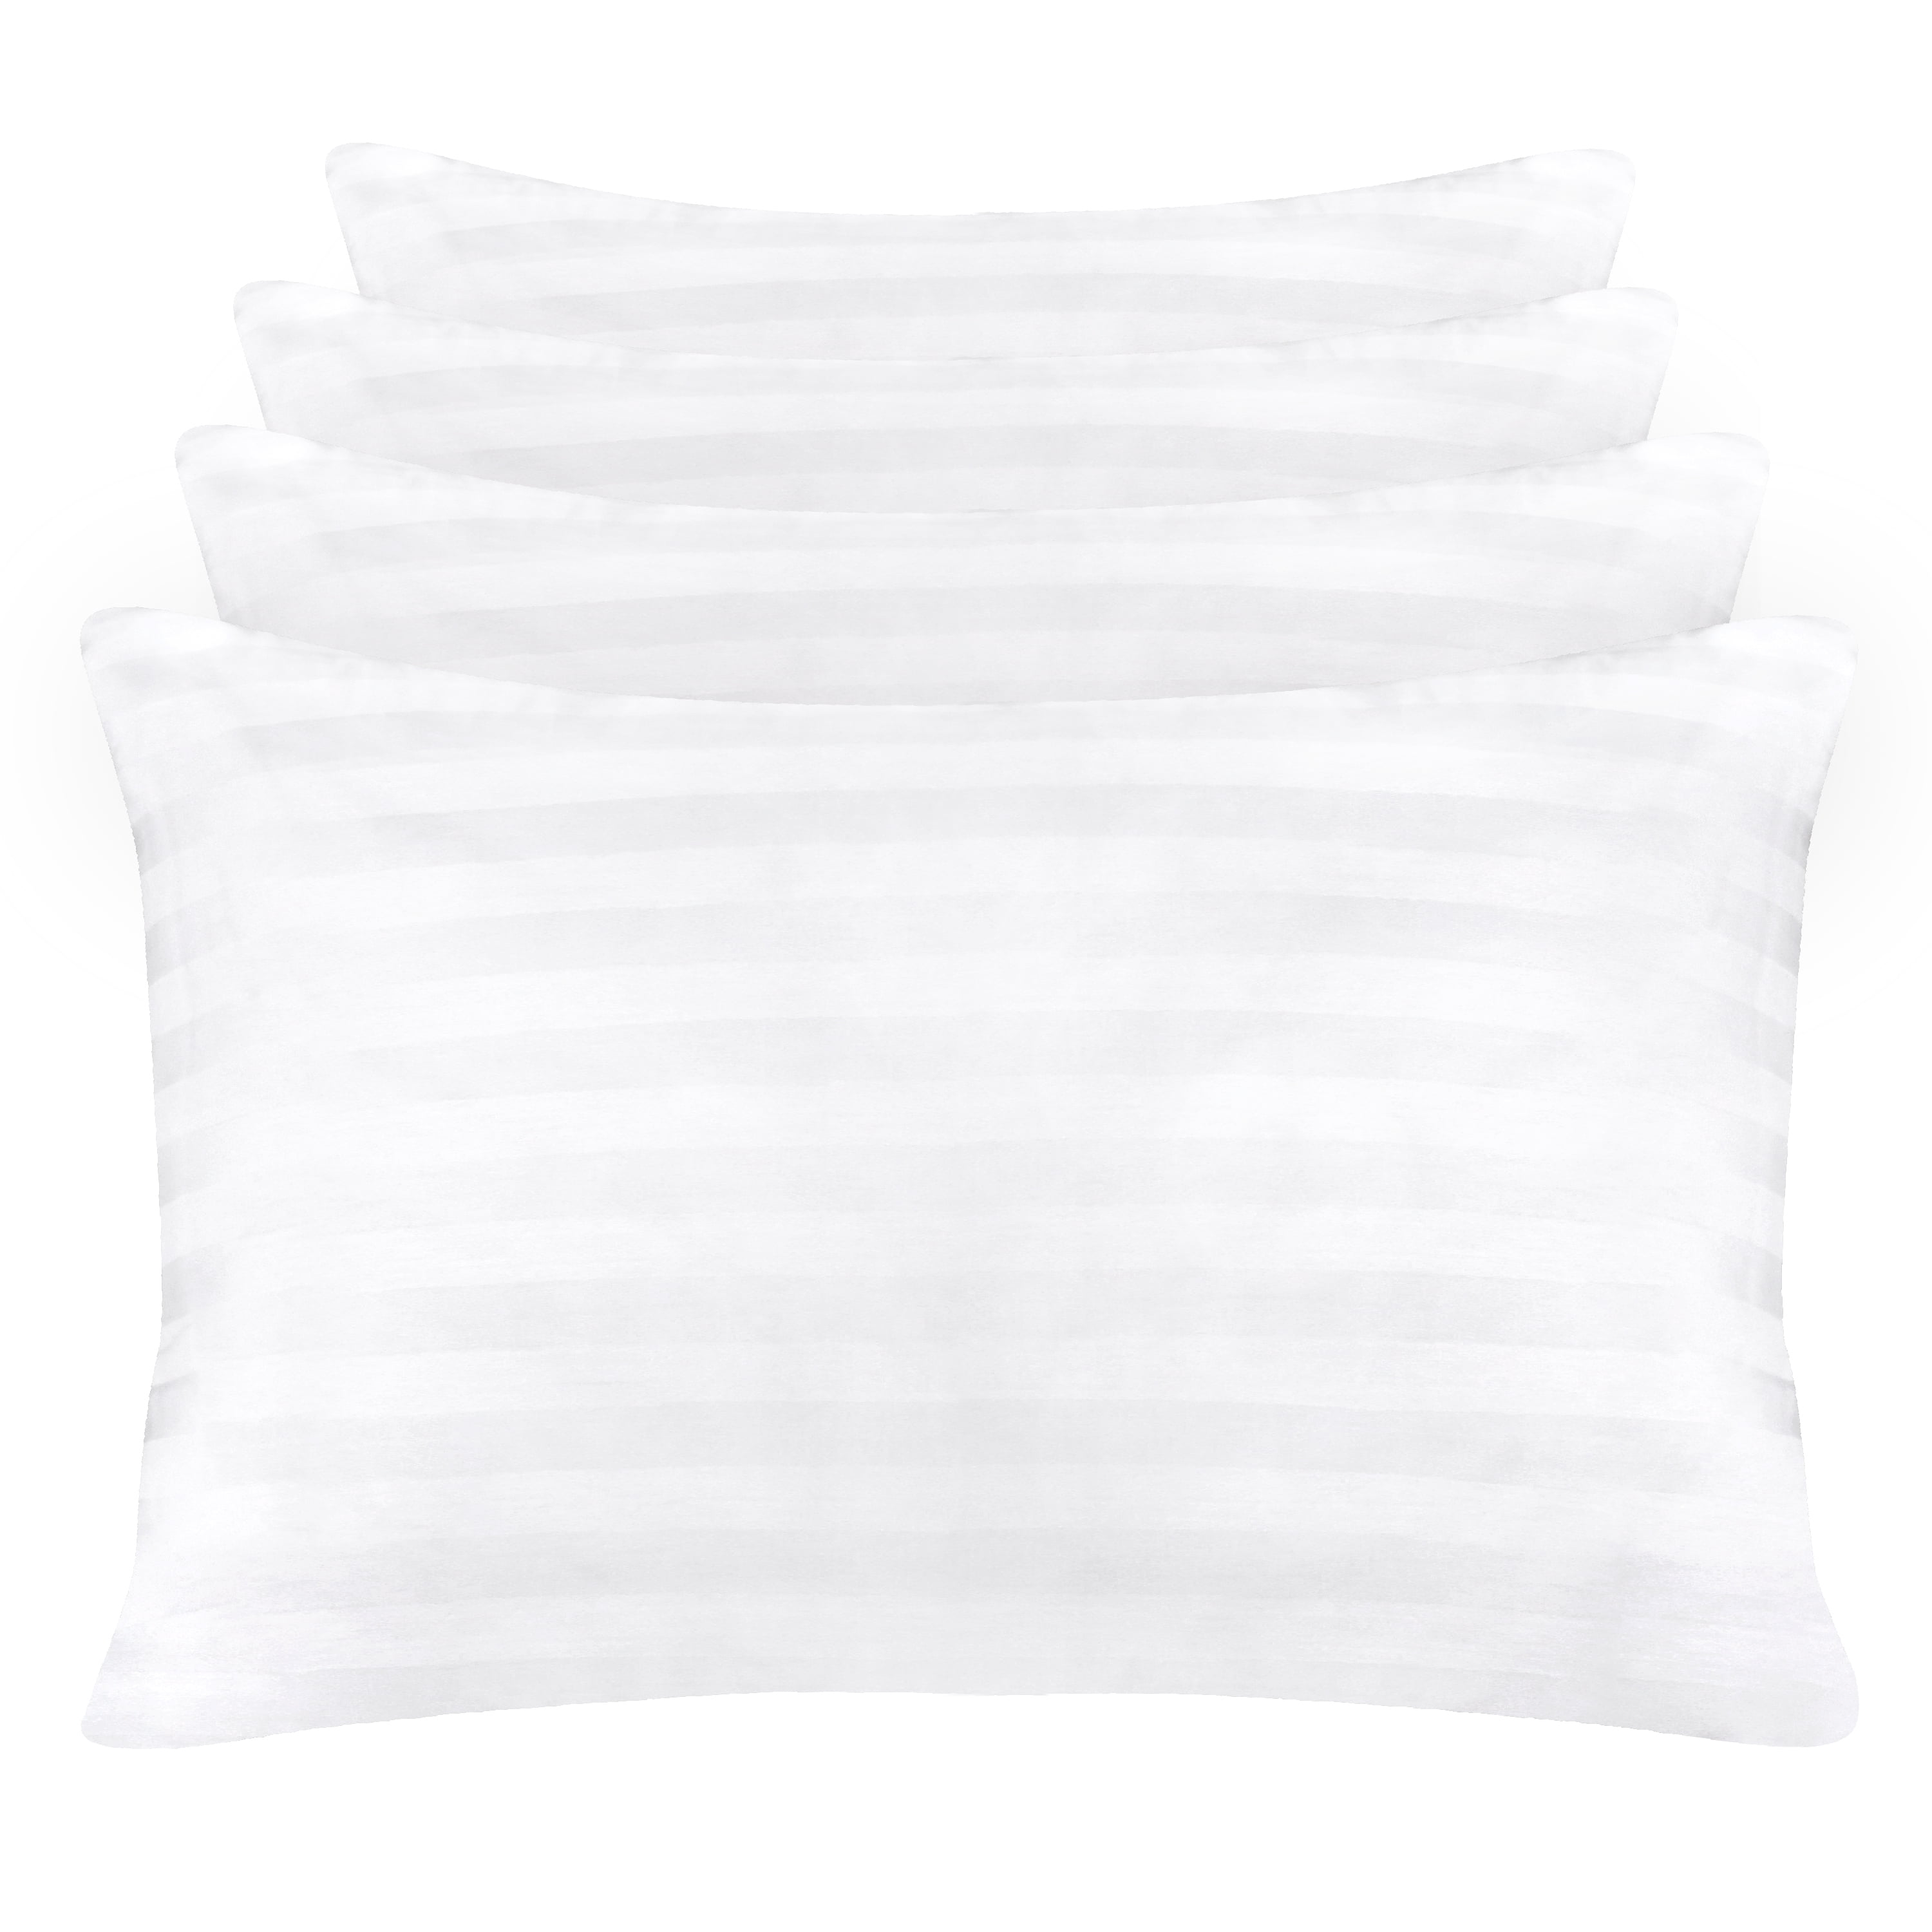 LB LAURA BENASSE LIVE THE DESIGN Luxury Queen Pillows 4 Pack, Pillows for  Sleeping, Hotel Pillows for Side Back & Stomach Sleepers, Down Alternative